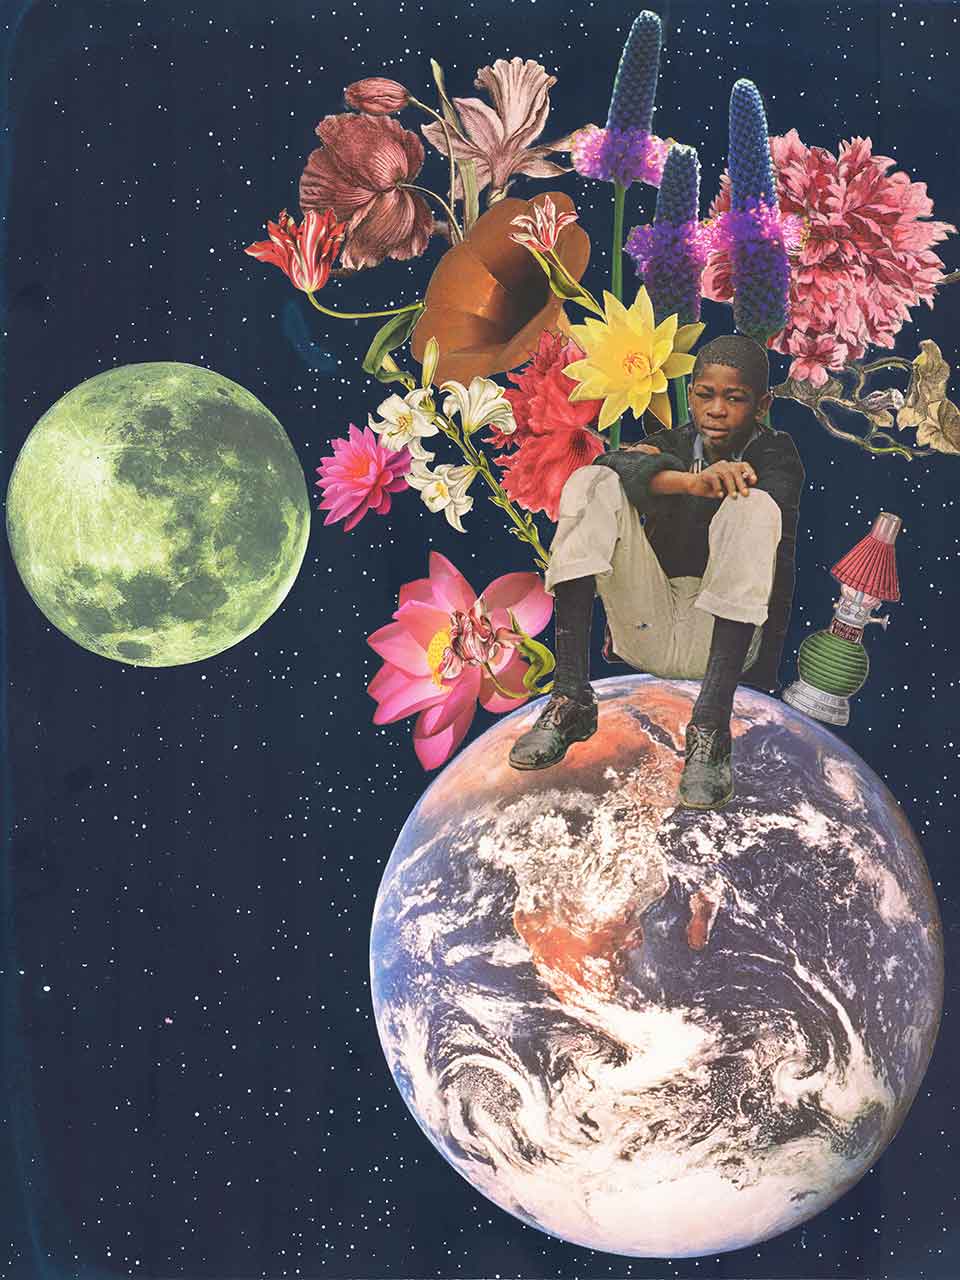 A digitally manipulated image of a young African American boy sitting on the Earth in space with flowers springing up all around him. The moon sits in the background. A detail from Terence Hammonds (American, born 1976), Hope, 2022, HD print on aluminum, 24 x 18 in.